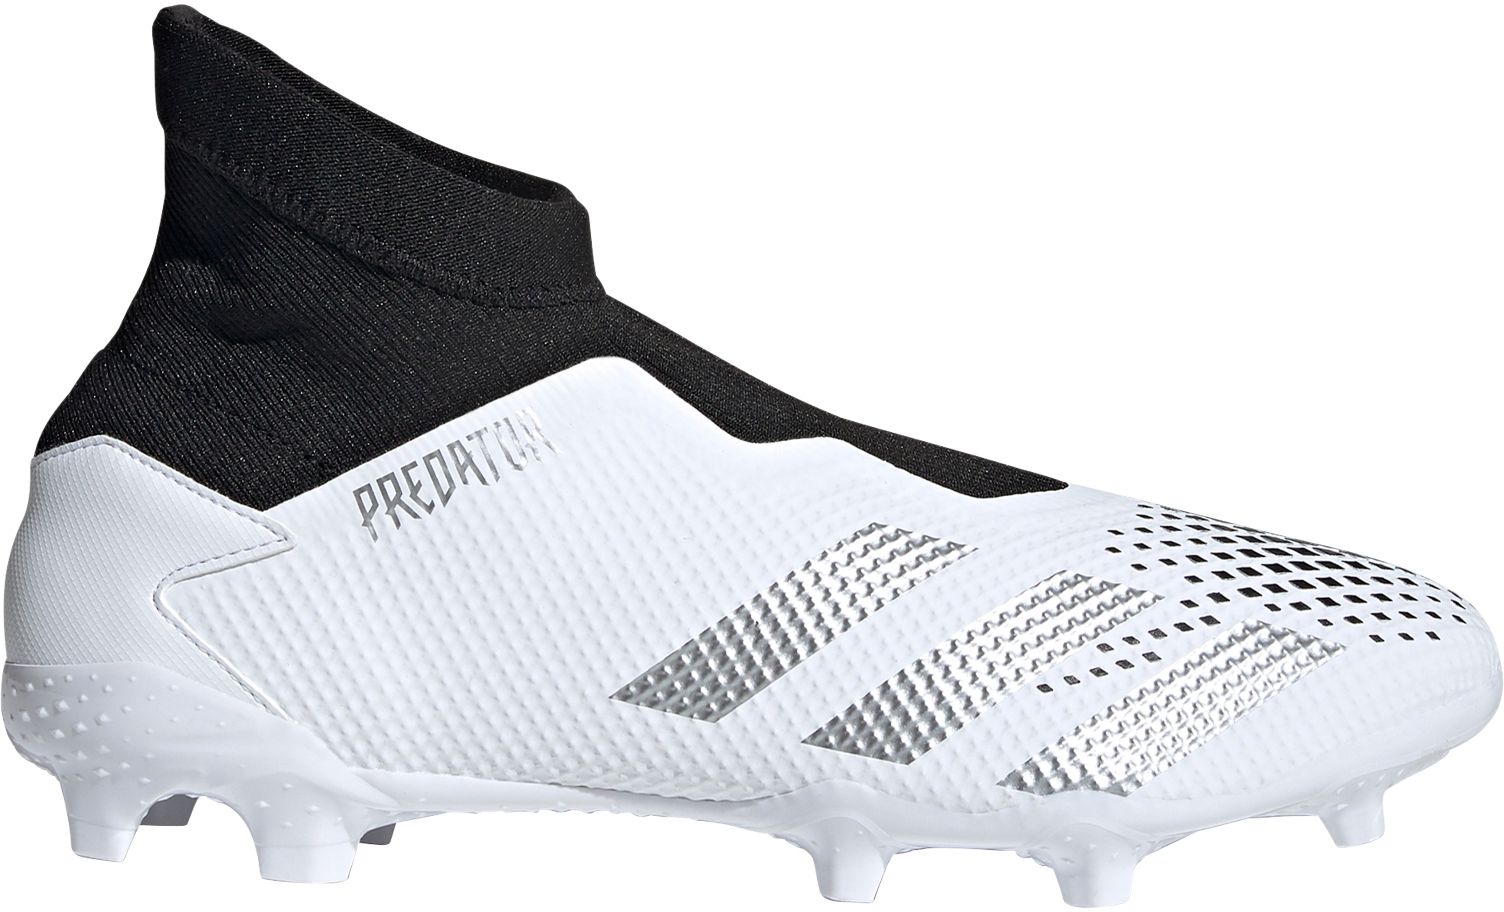 laceless soccer cleats